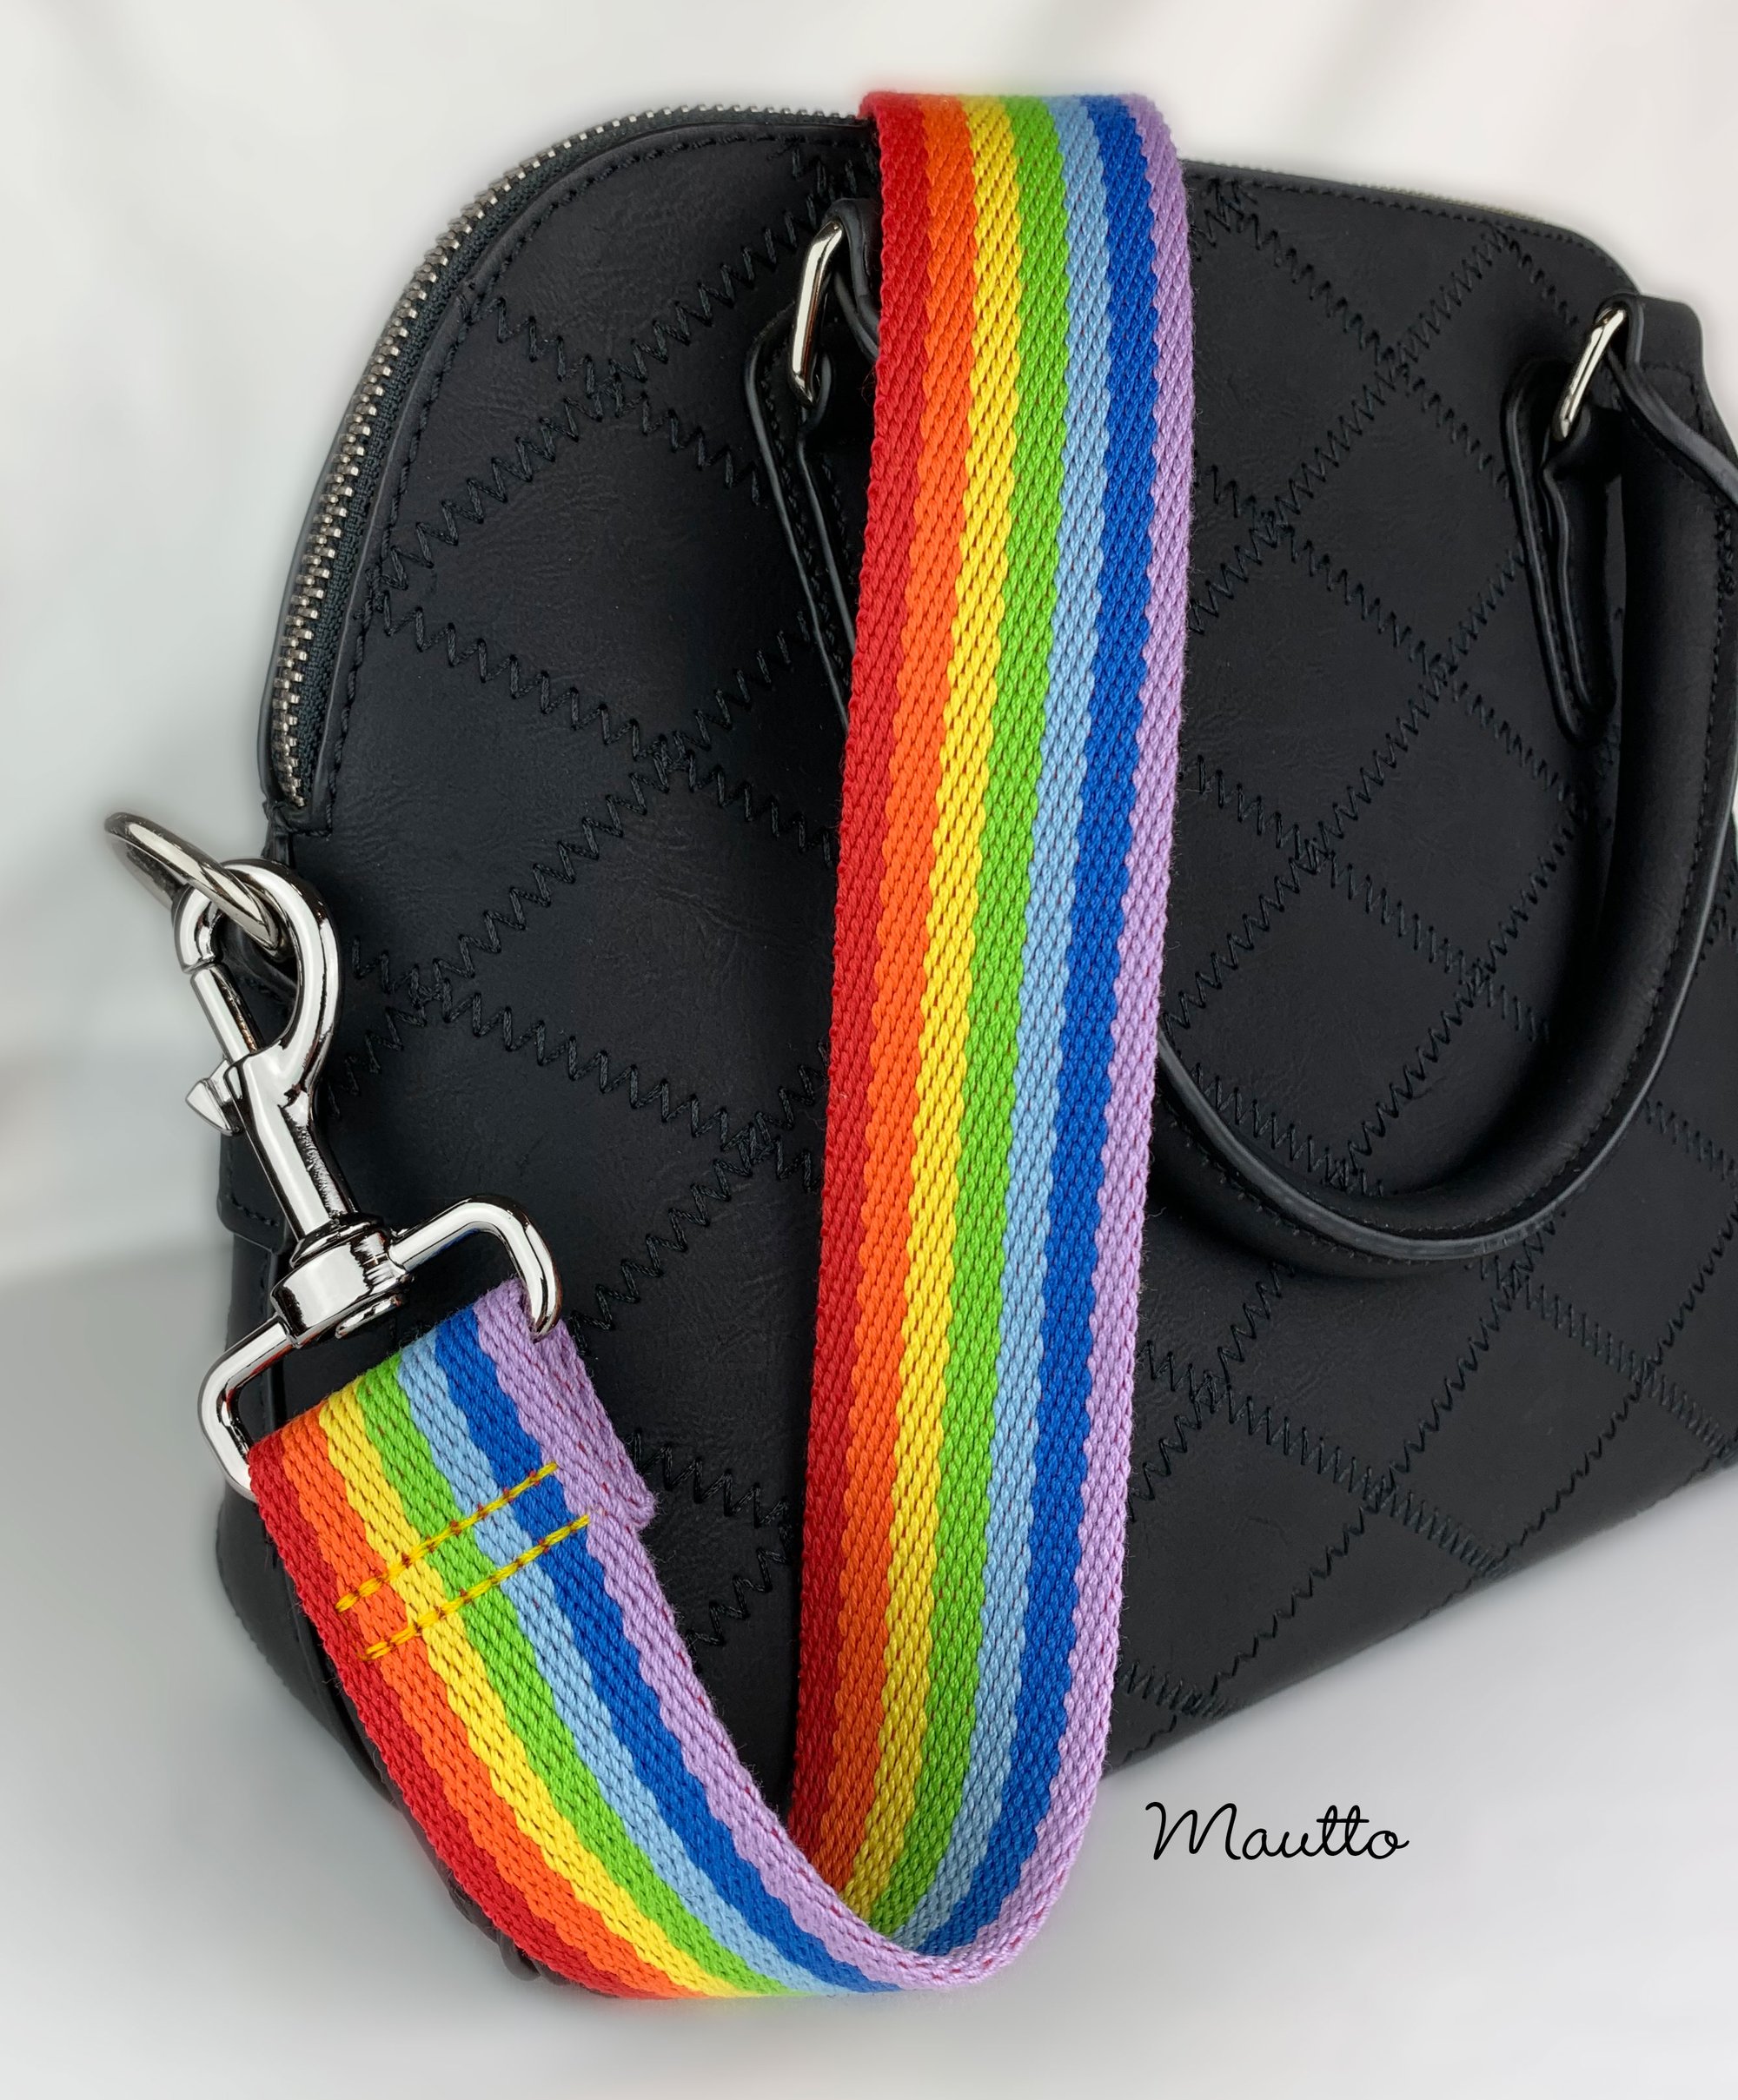 Rainbow Strap for Bags - 1.5&quot; Wide - Adjustable Crossbody Length - Cotton Canvas - Style #19 ...